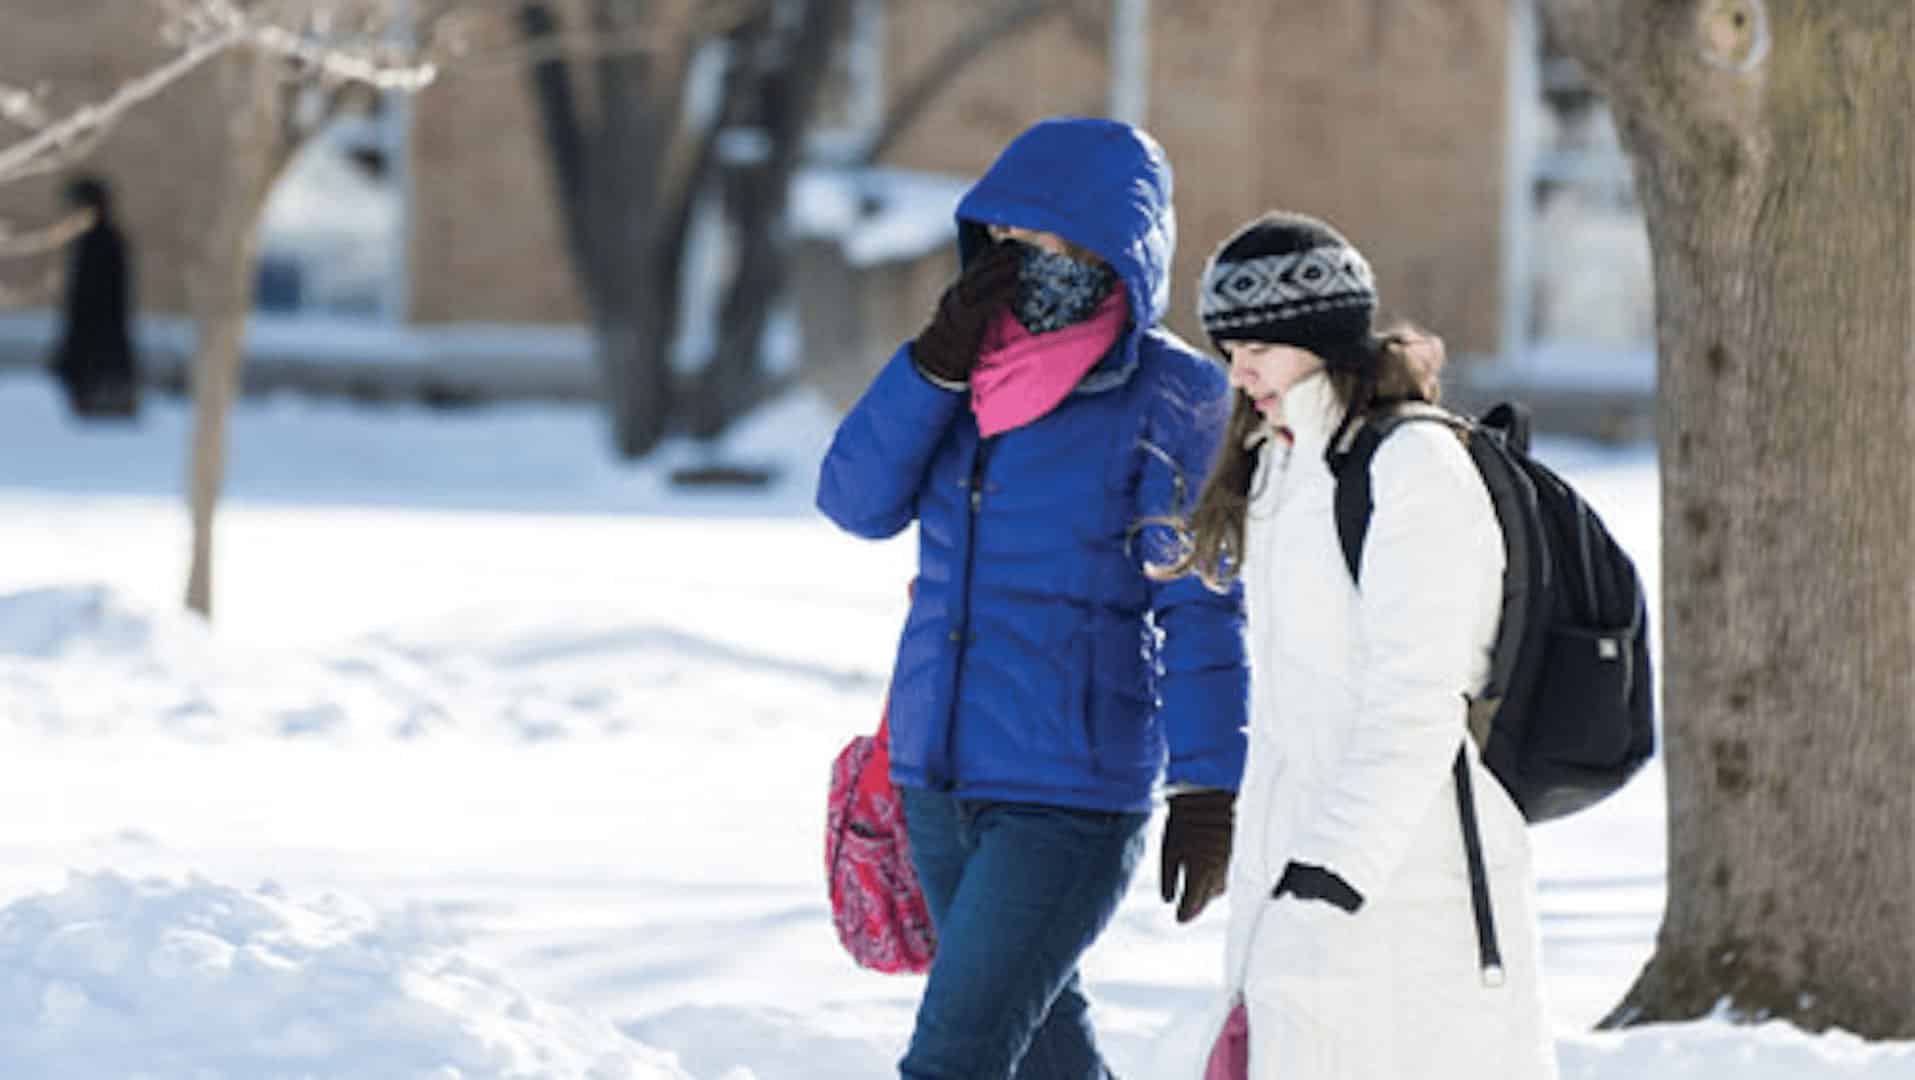 Students walking on campus in snow